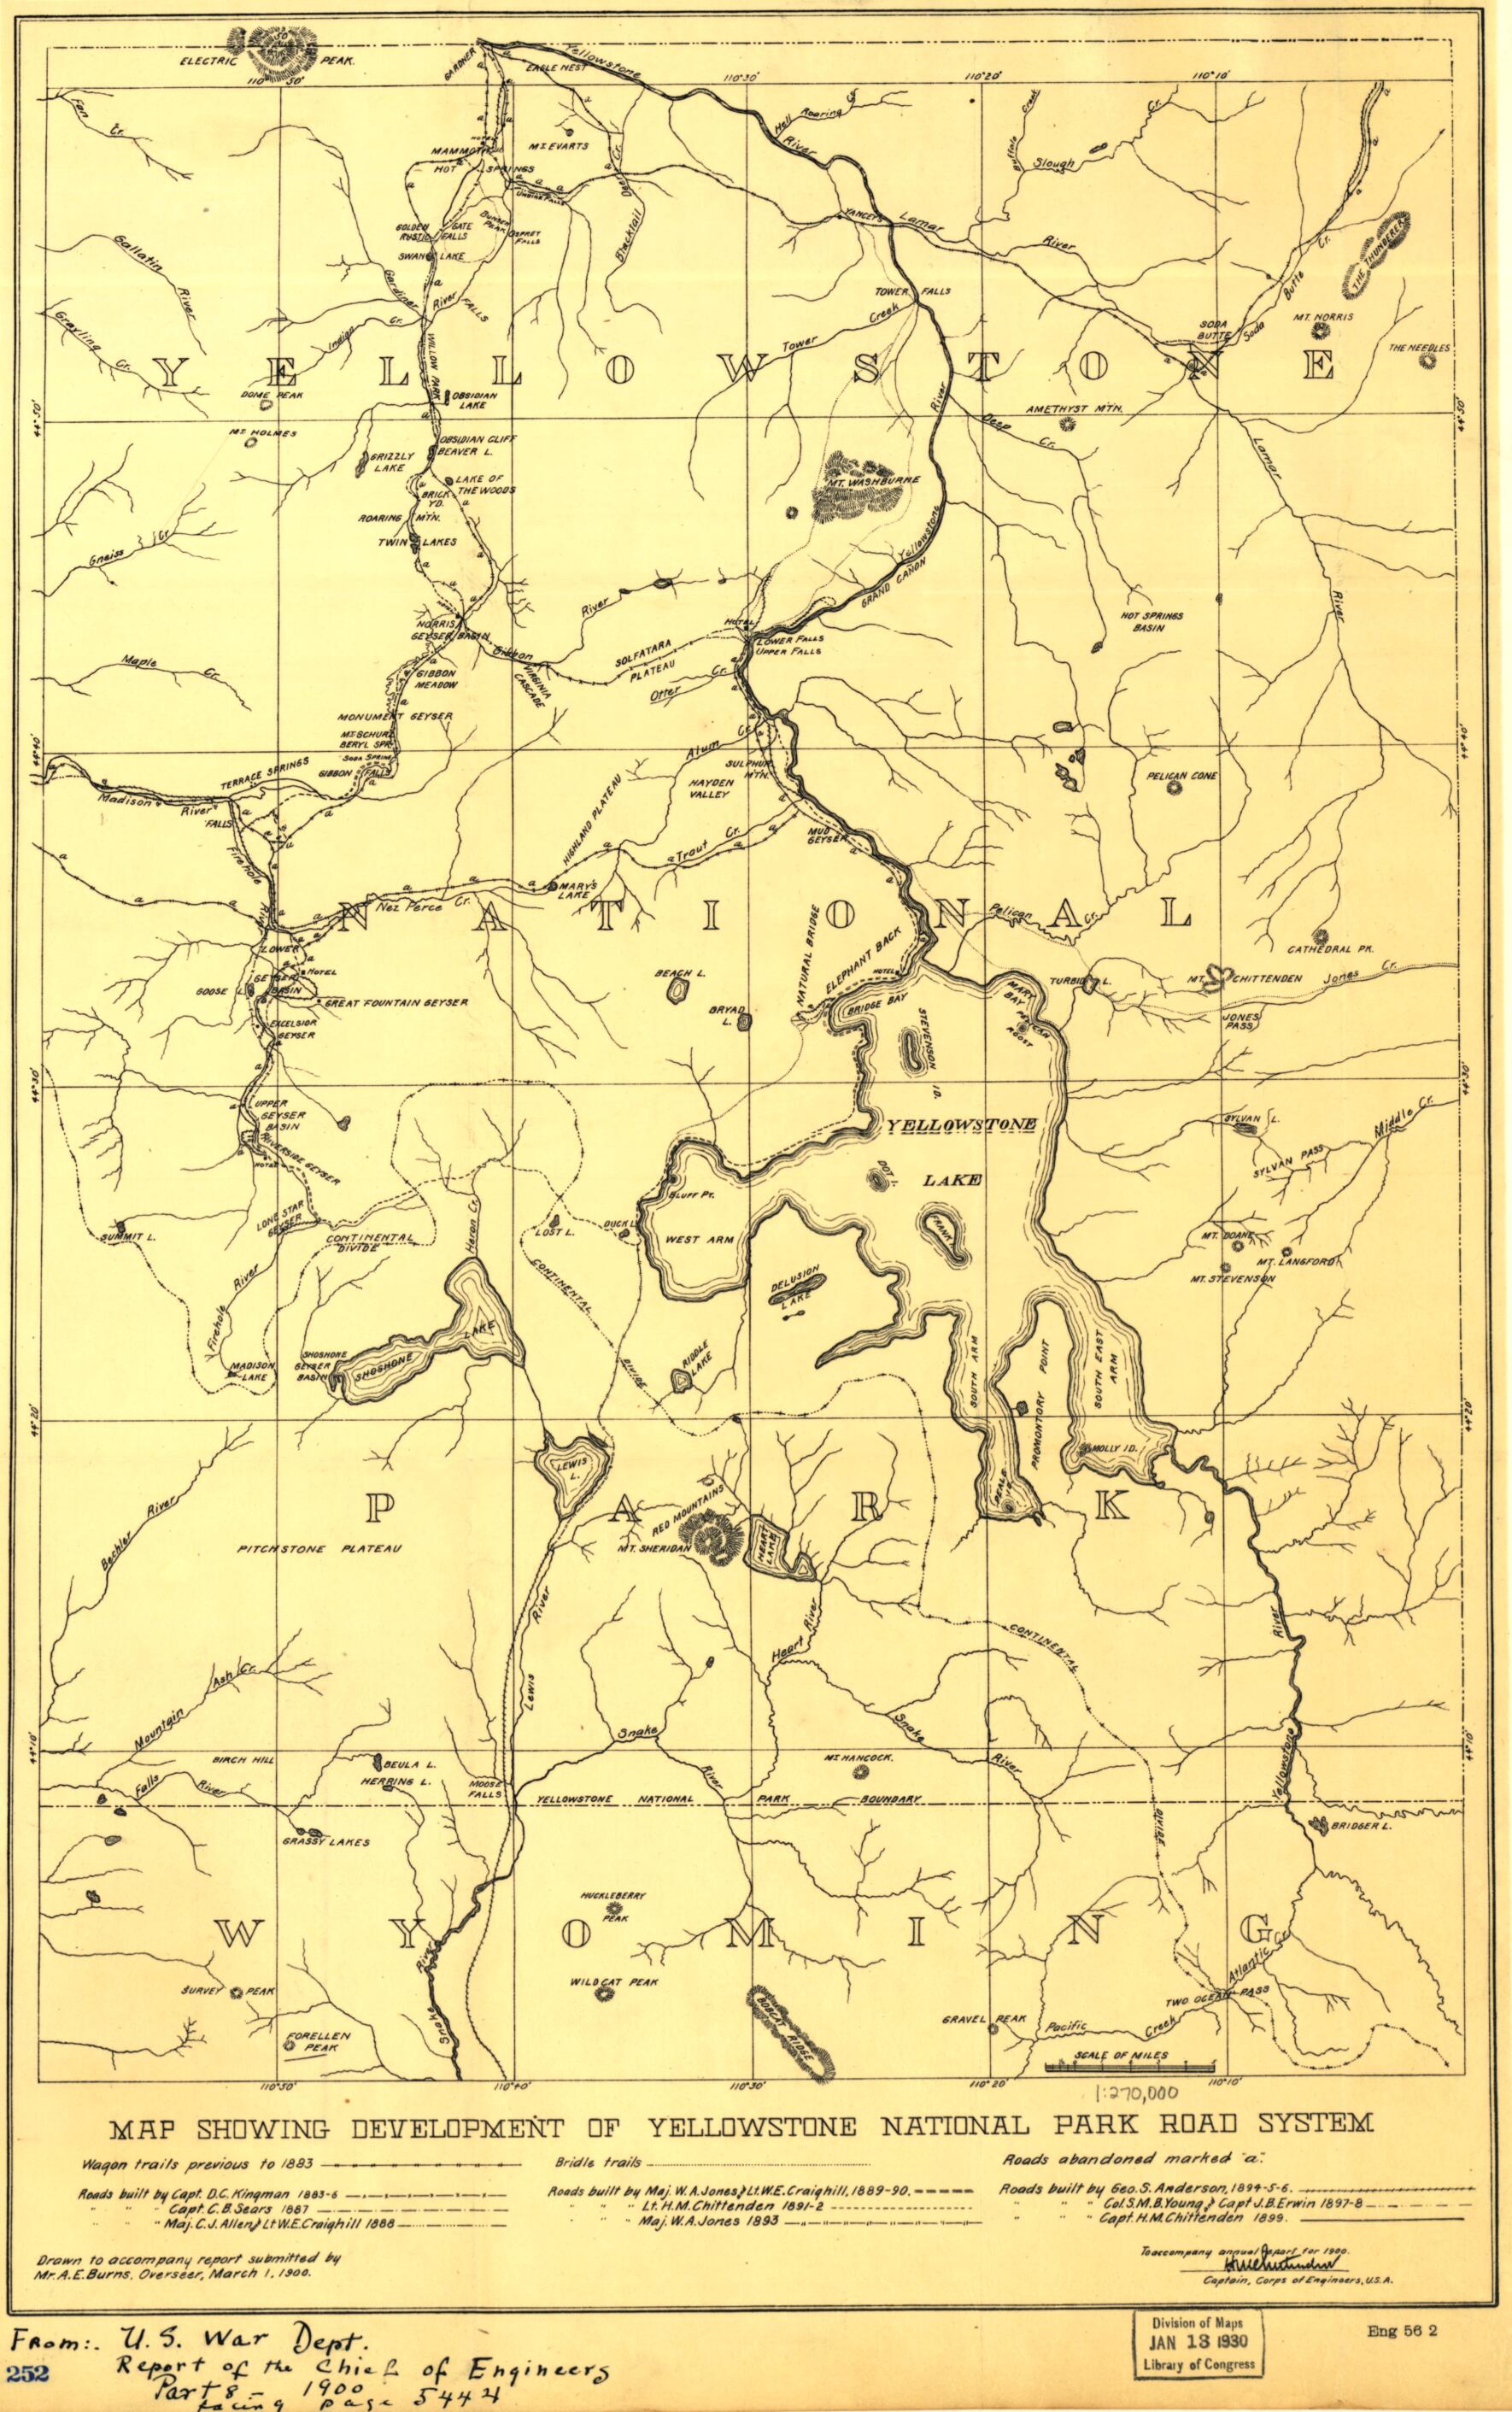 This old map of Map Showing Development of Yellowstone National Park Road System from 1900 was created by A. E. Burns,  United States. War Department. Corps of Engineers in 1900